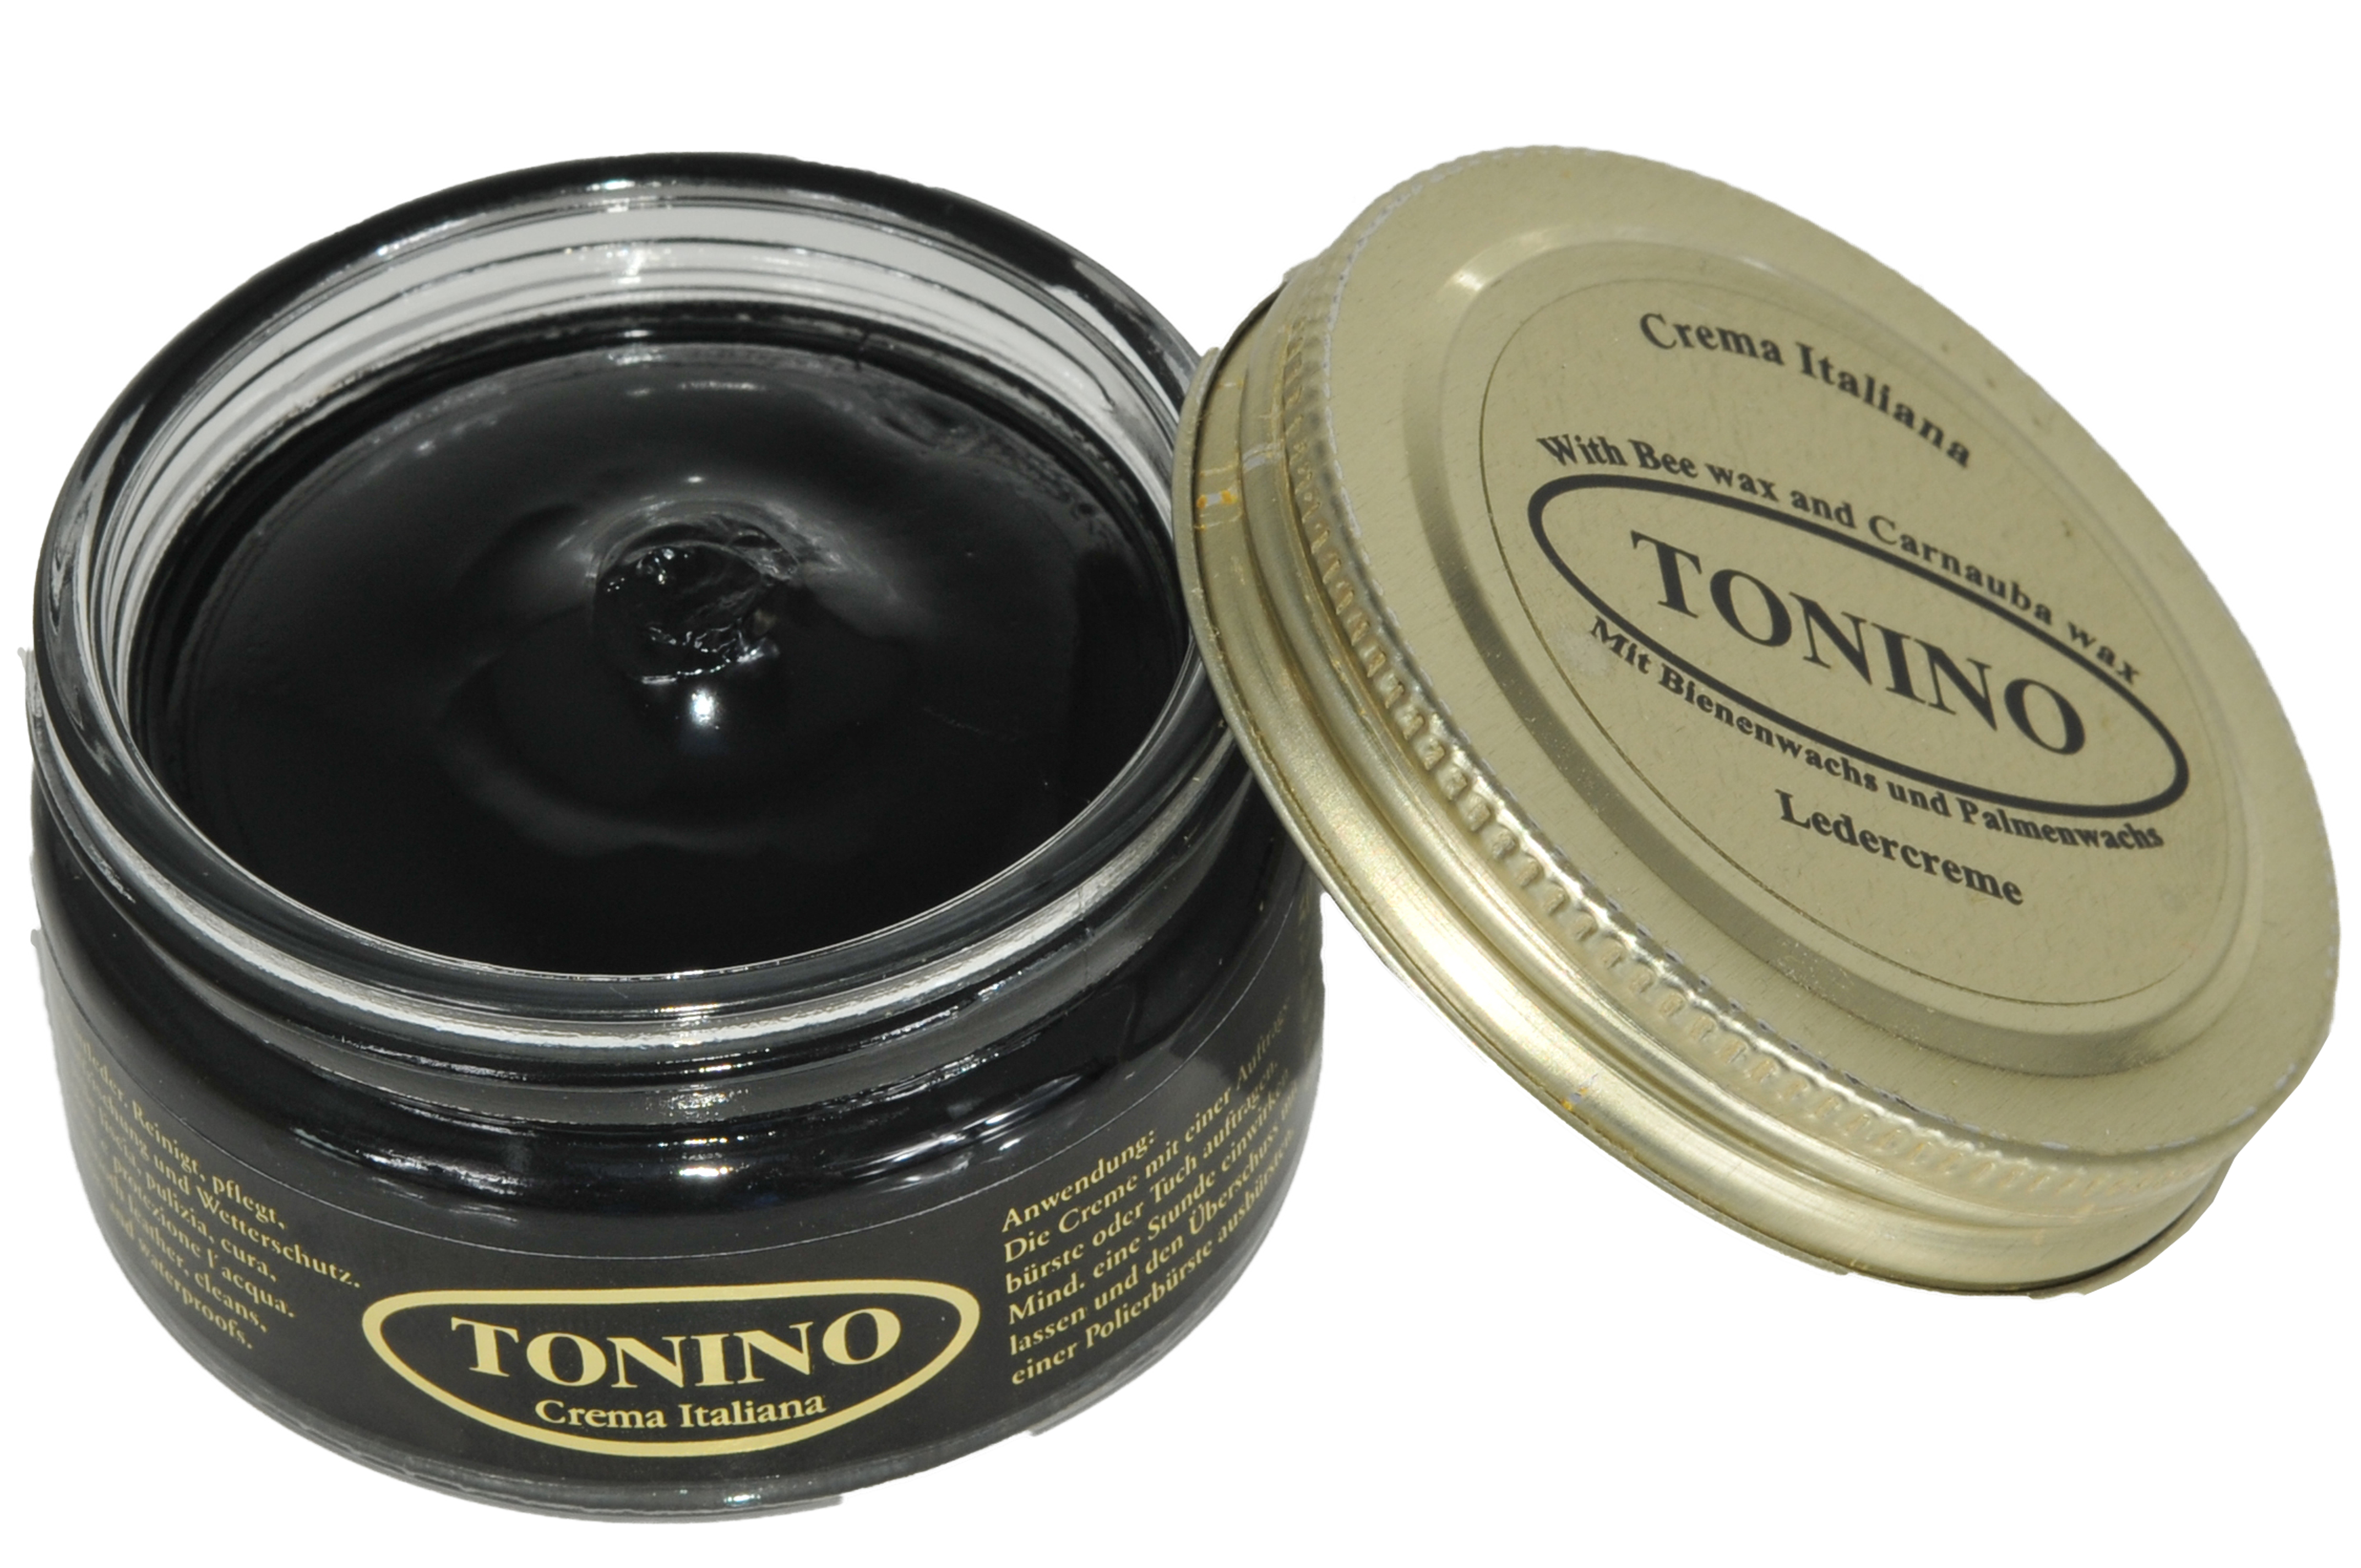 Black Tonino leather cream in the glass. Care + protection.